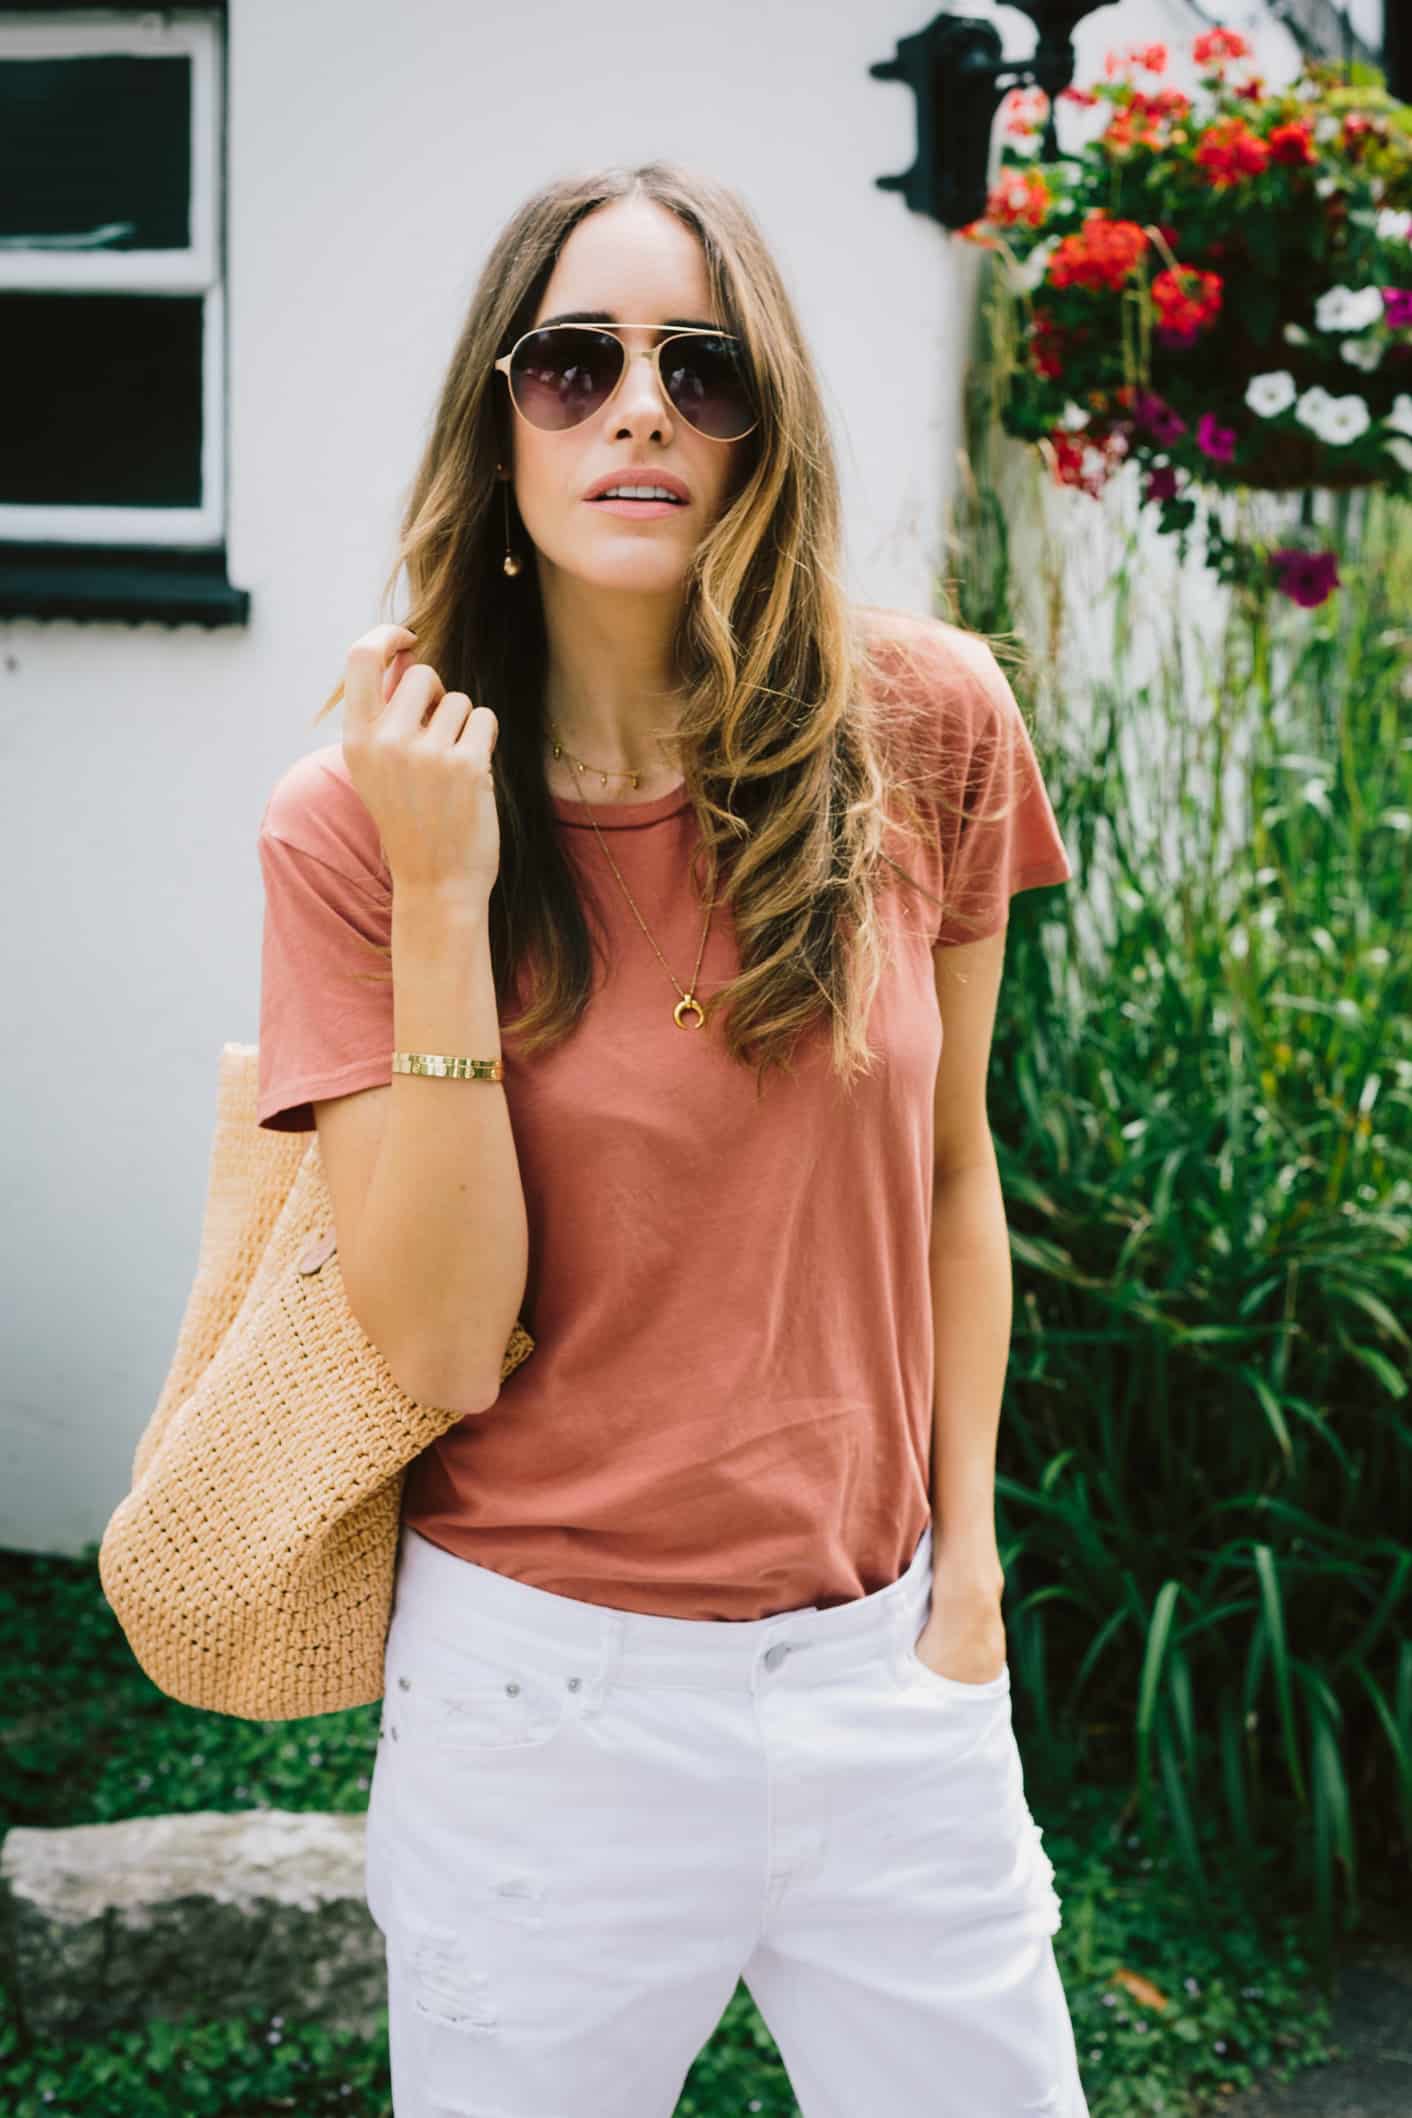 Louise Roe wearing a casual off duty style look with tee and jean